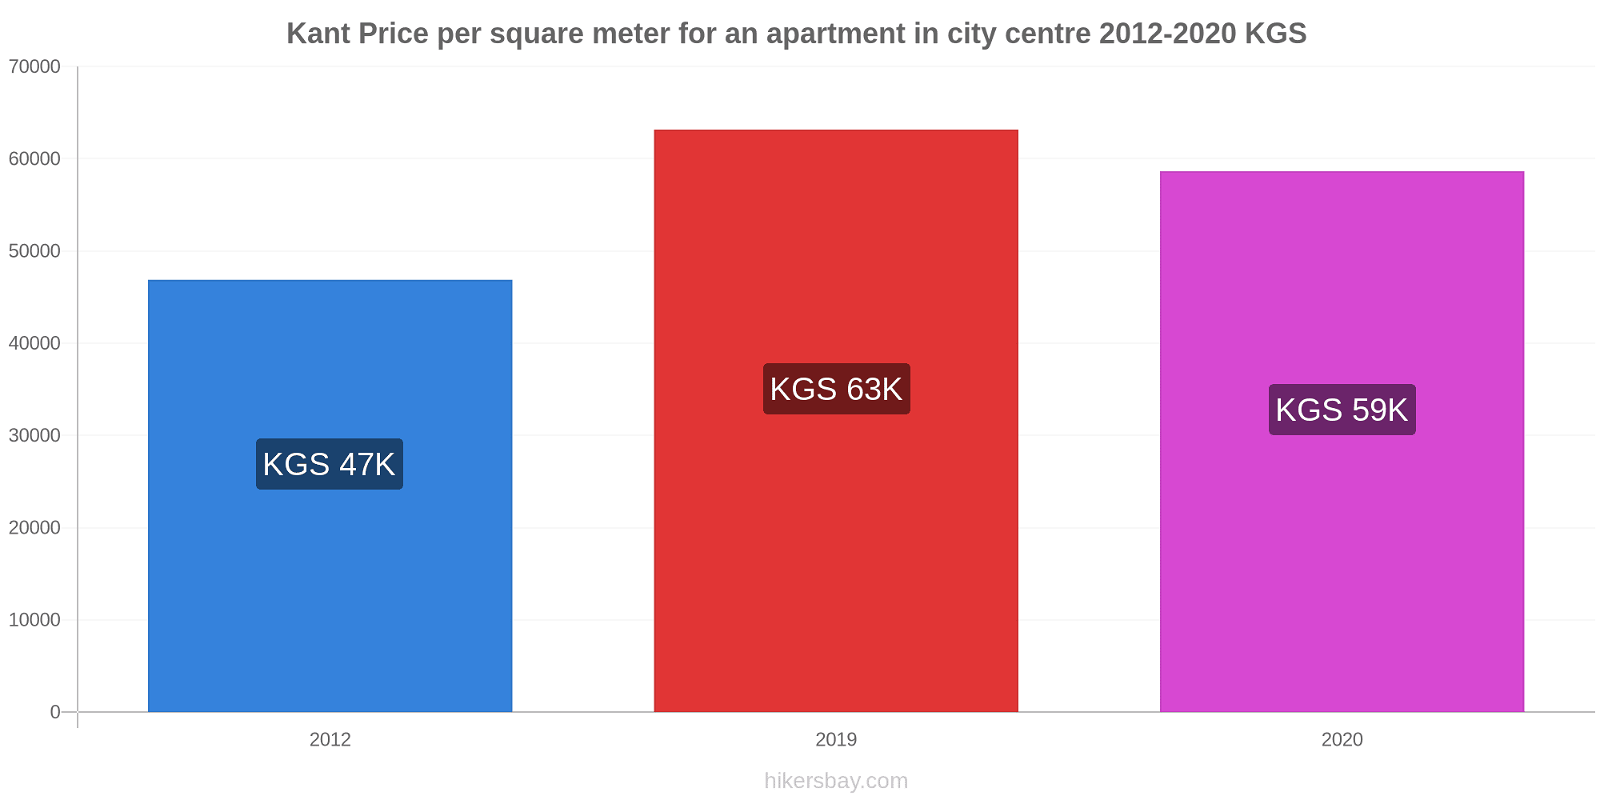 Kant price changes Price per square meter for an apartment in city centre hikersbay.com